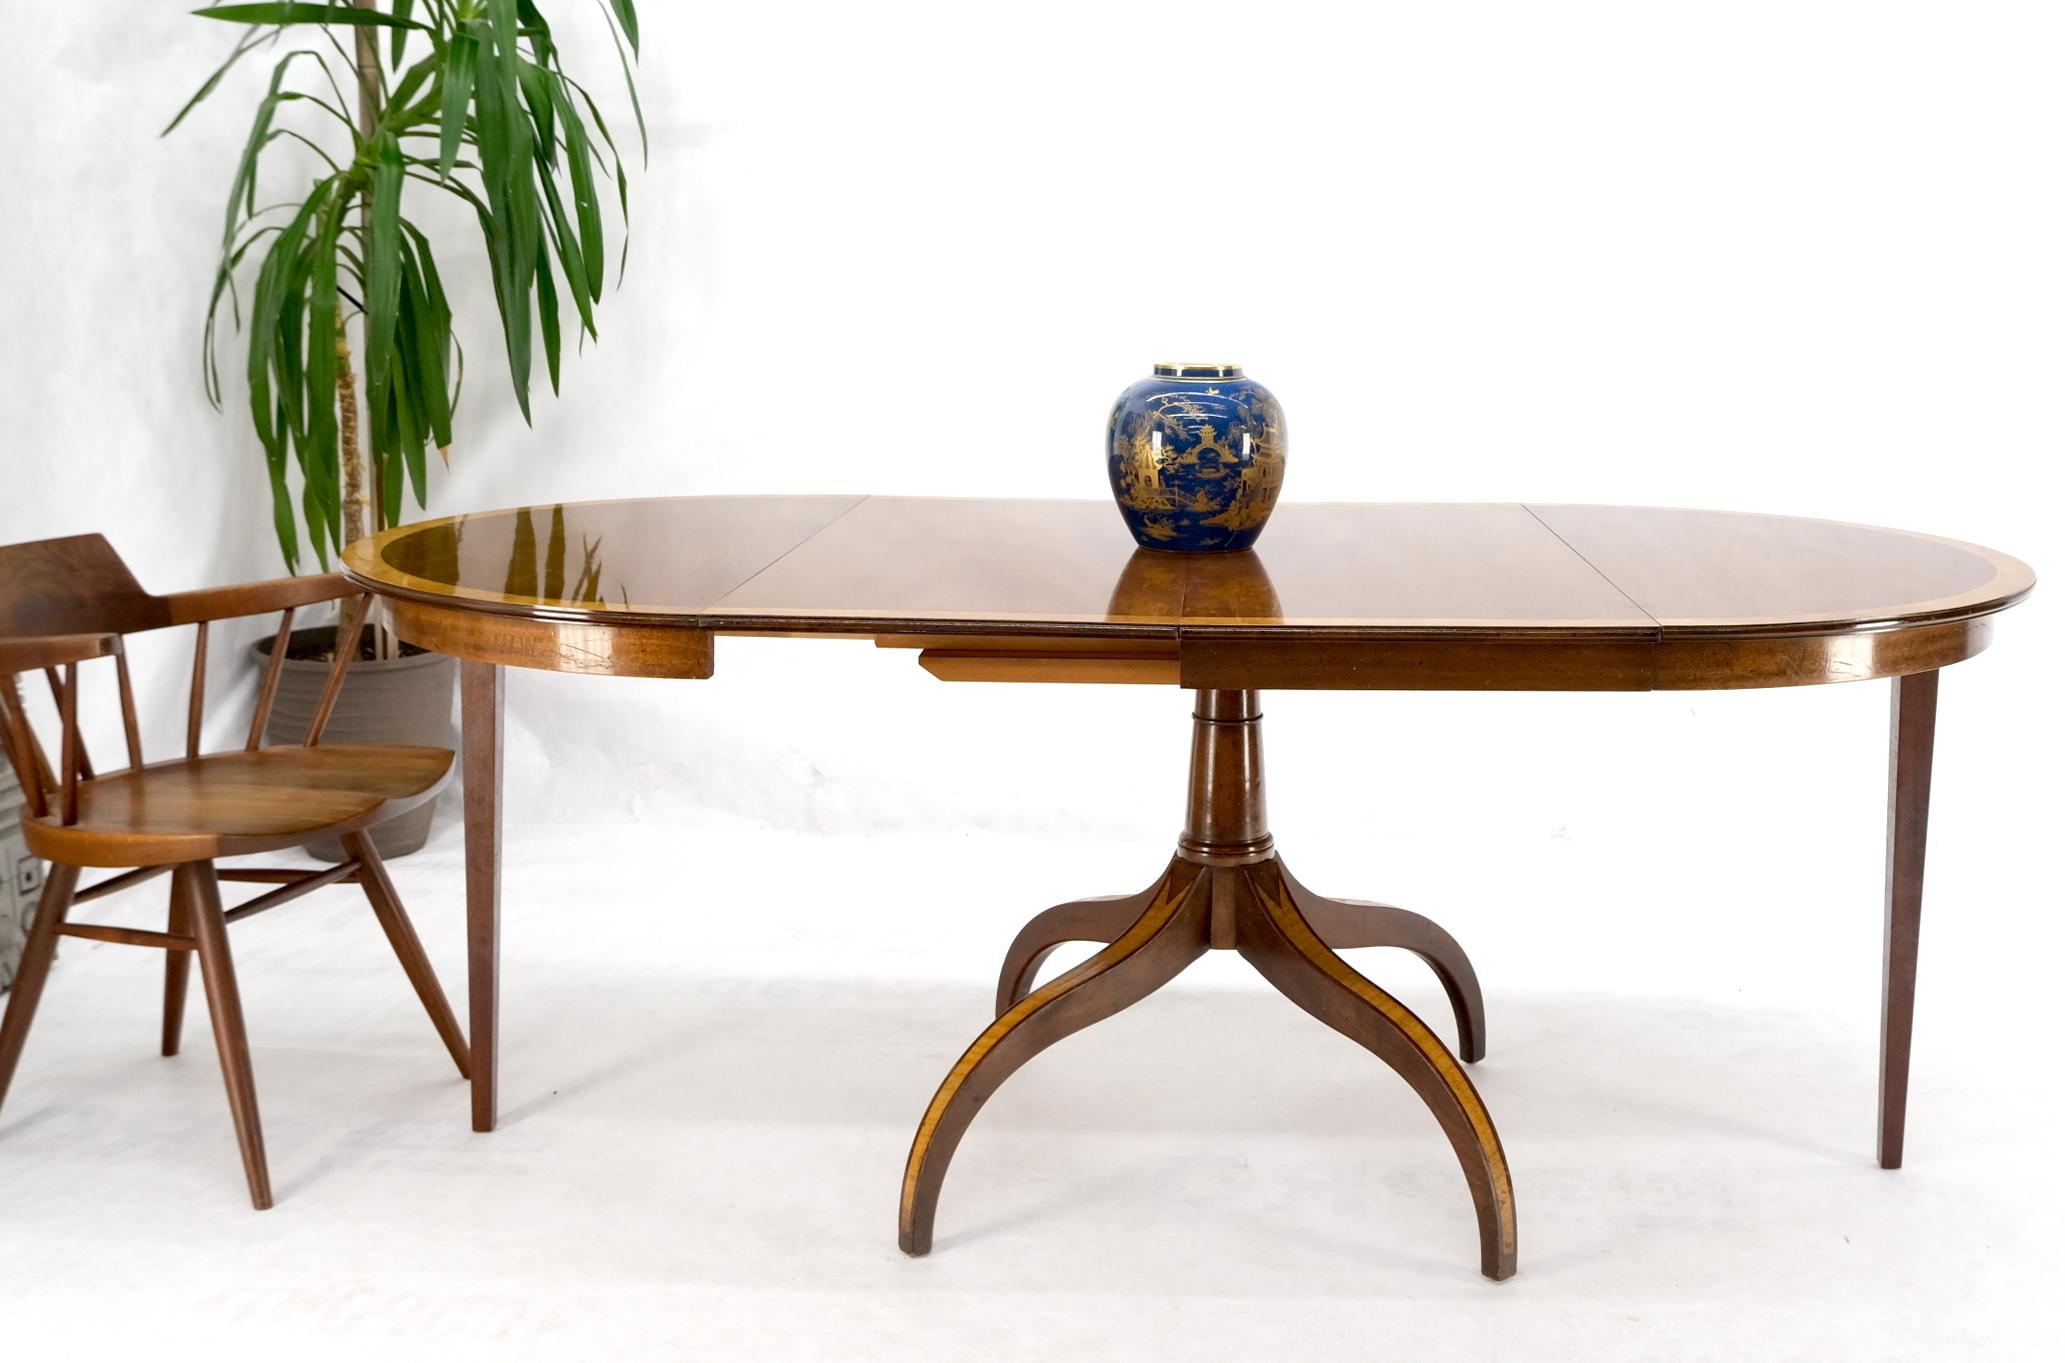 Charak Lacquered Mahogany Banded Round Dining Table w/ 2 Leaves Inlaid Legs Mint For Sale 5